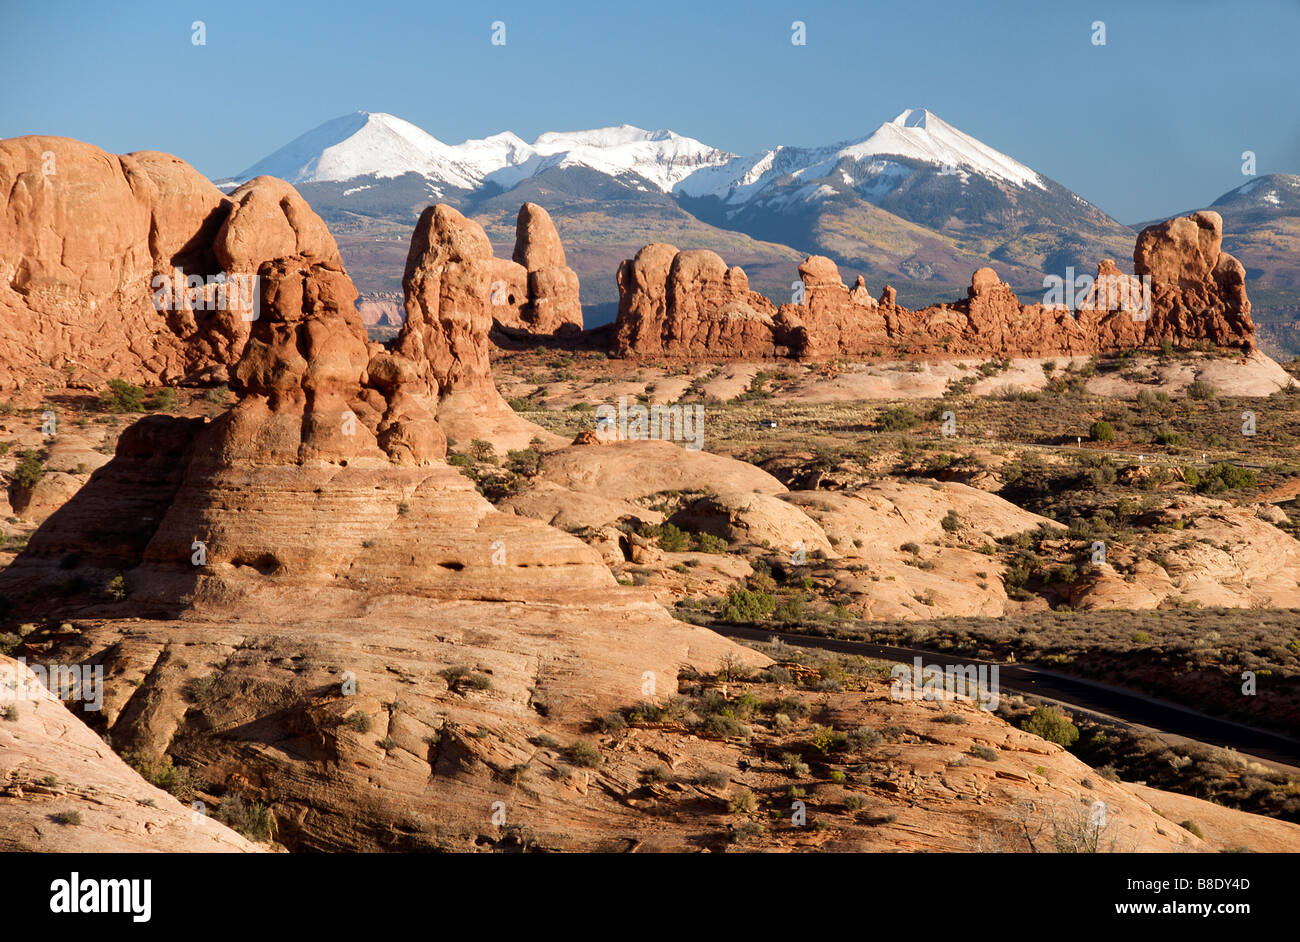 Parade of Elephants with backdrop of snow capped mountains in evening light Arches National Park Utah USA Stock Photo